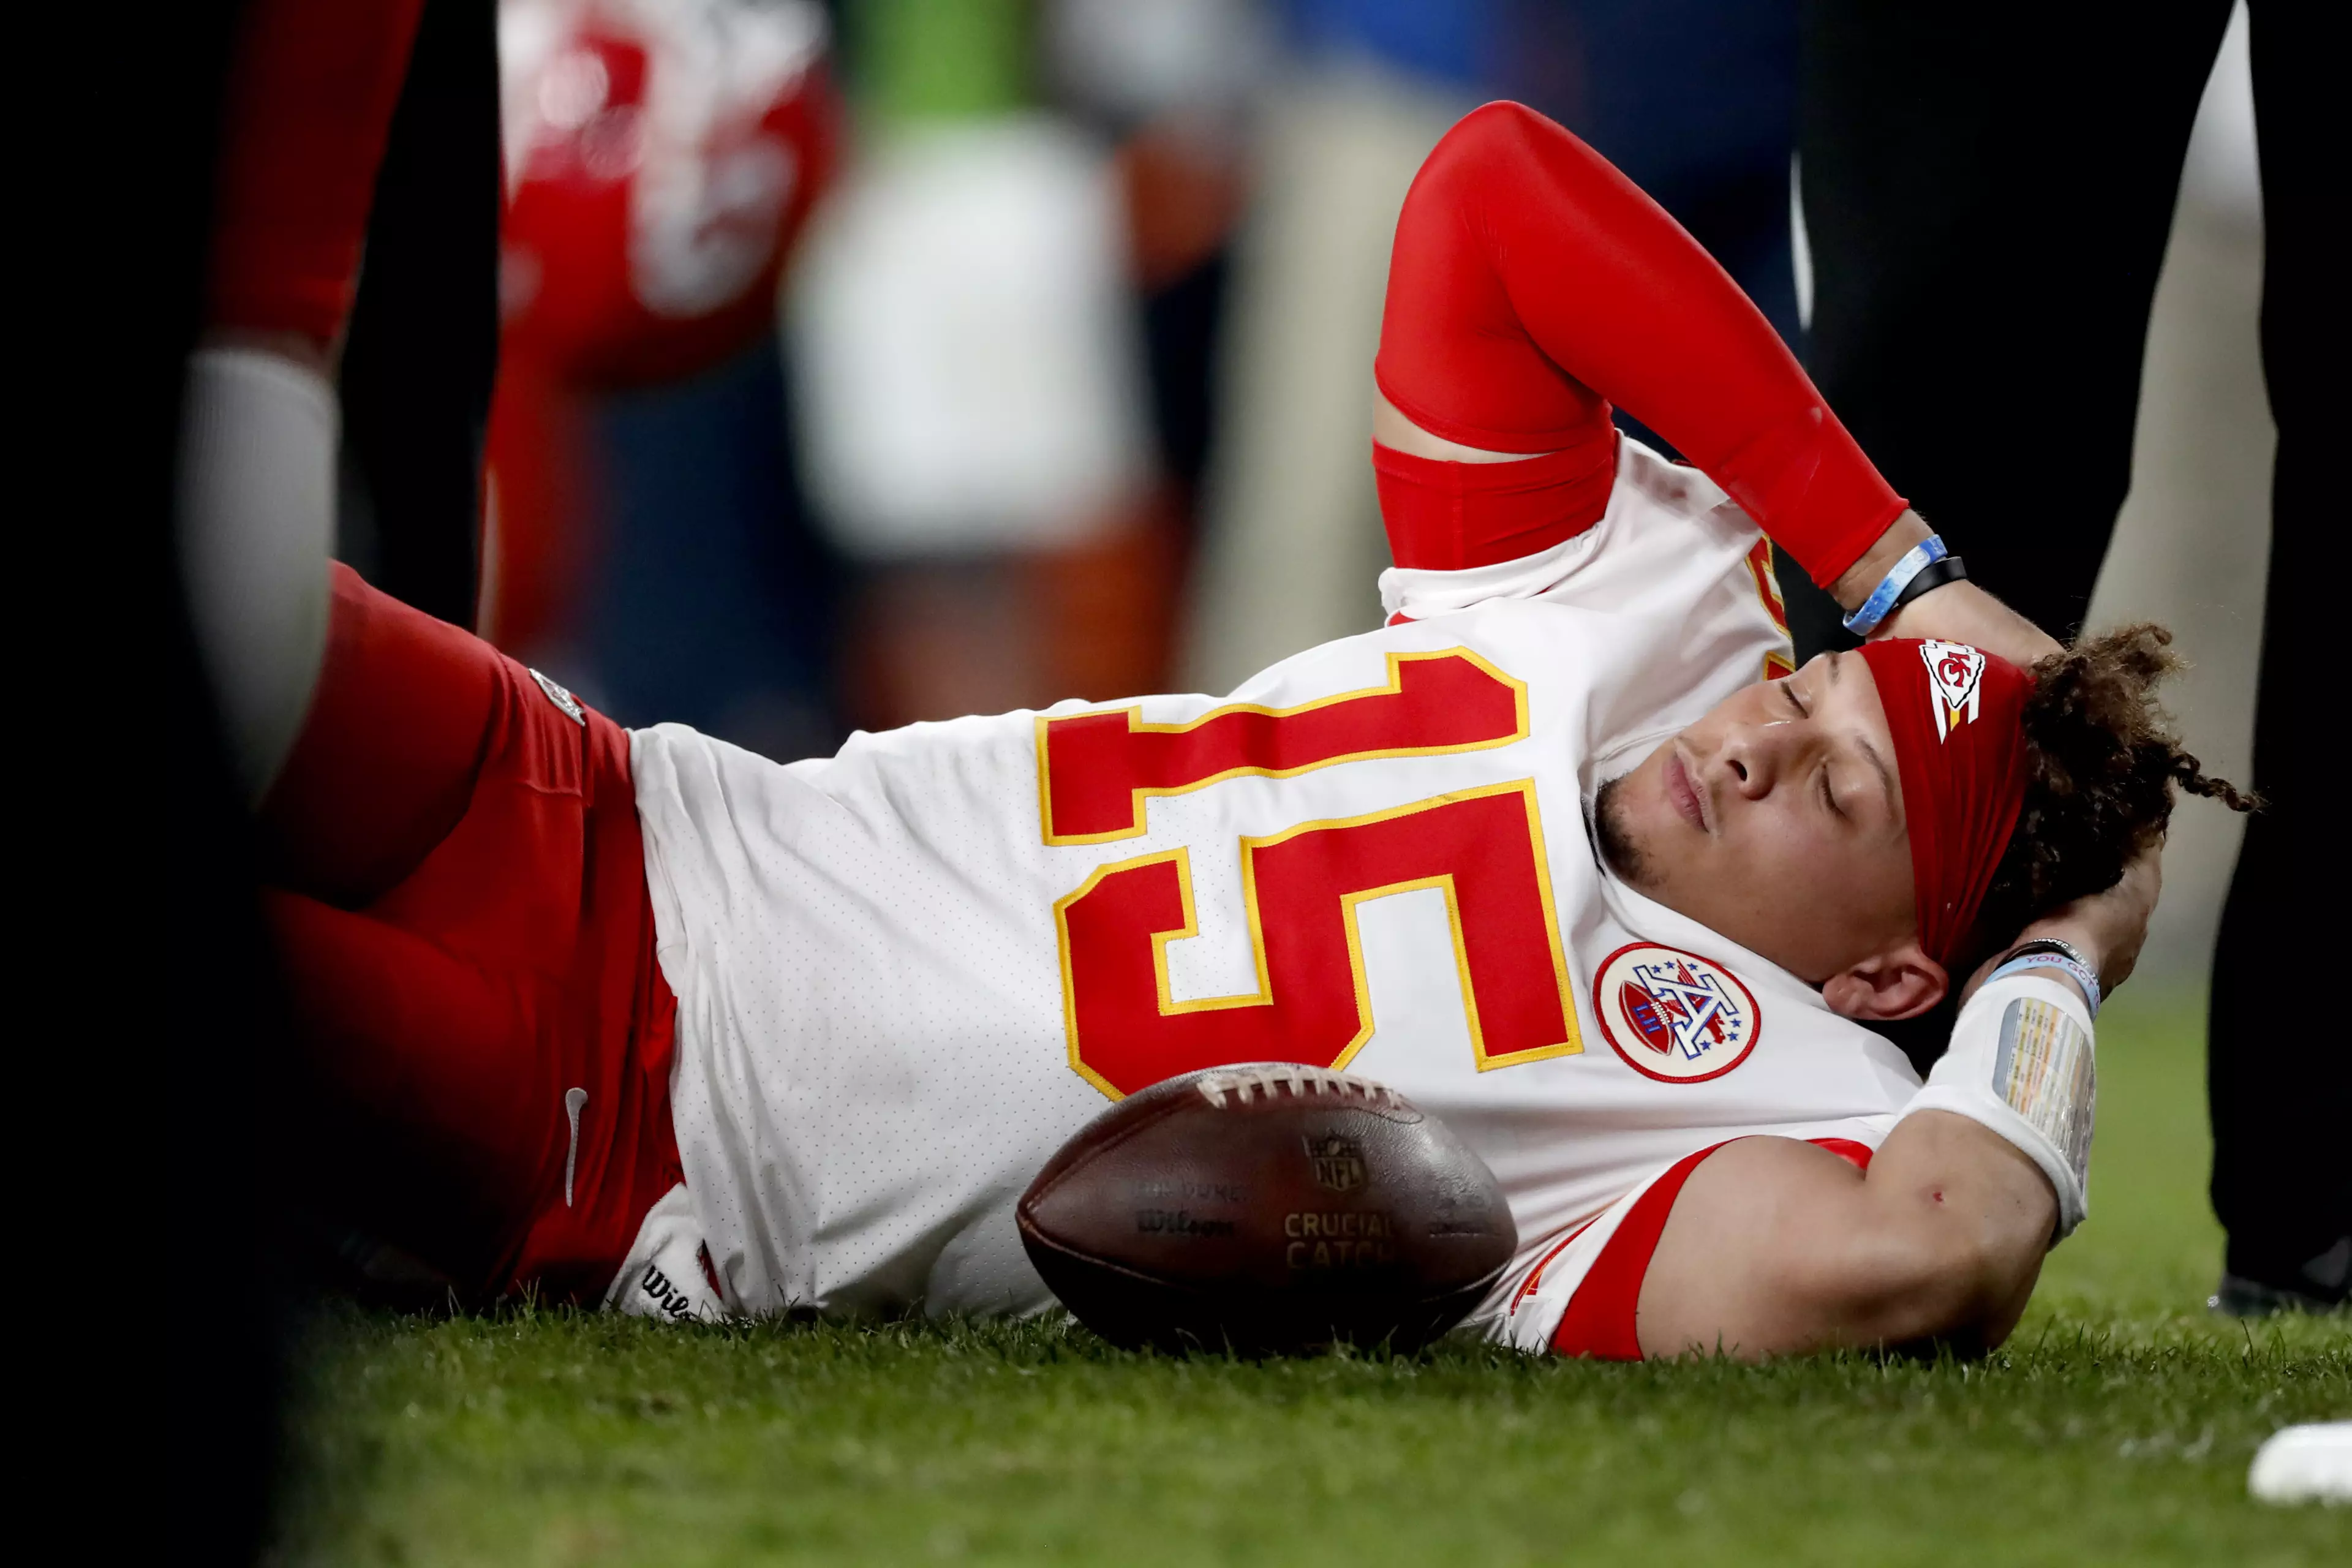 Patrick Mahomes suffered a knee injury in Kansas City Chiefs' win over Denver Broncos